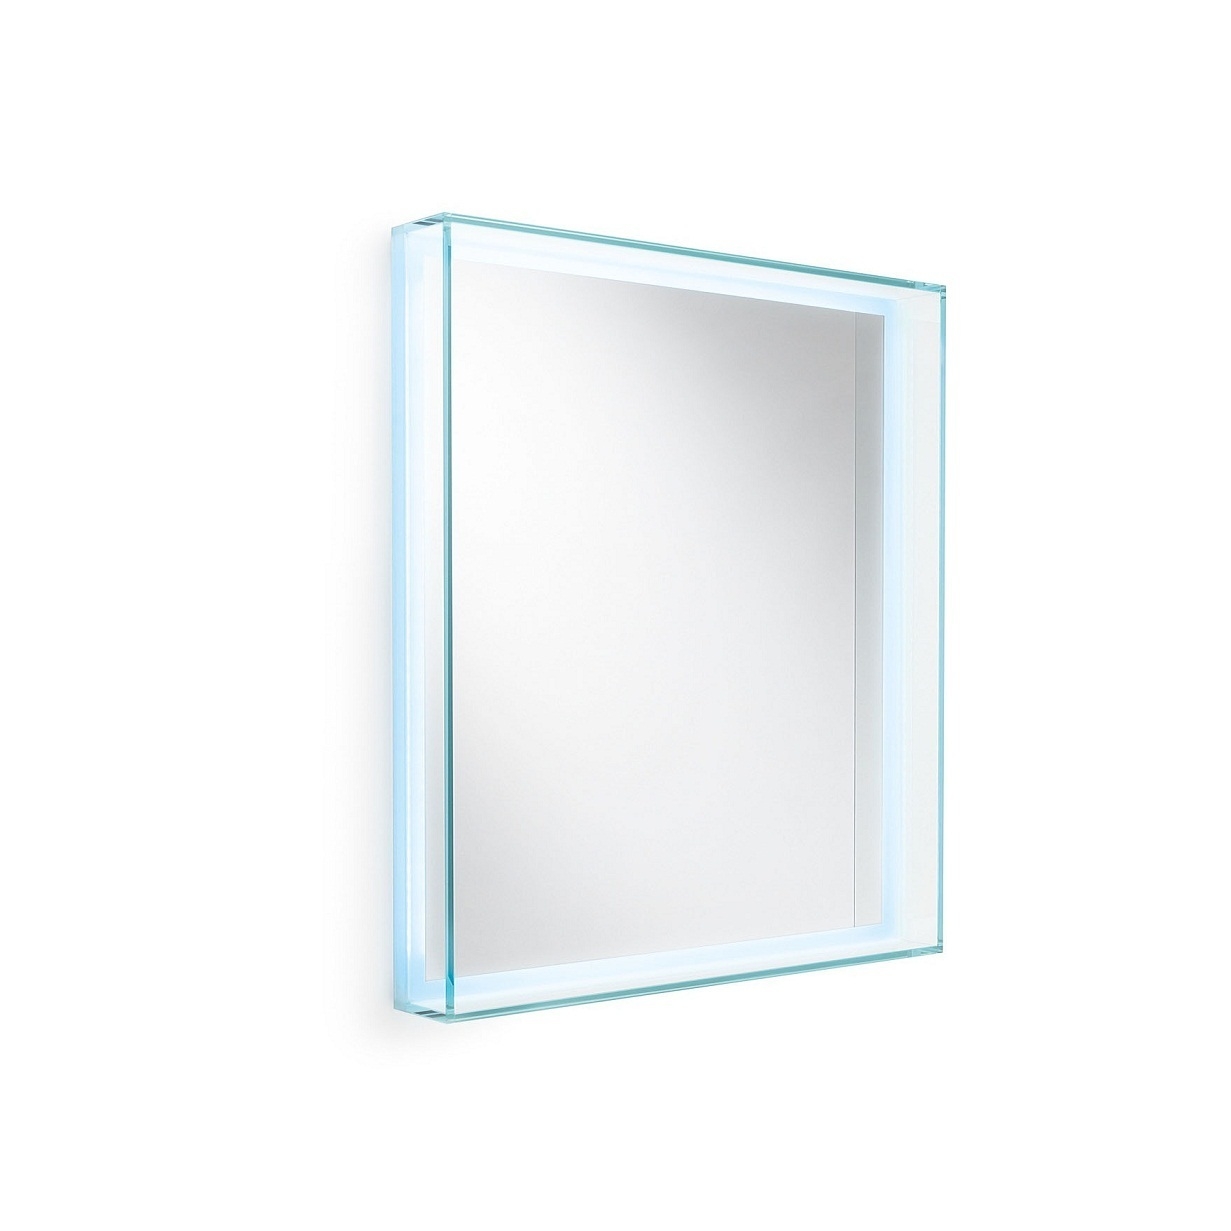 Speci 5682 mirror with LED light